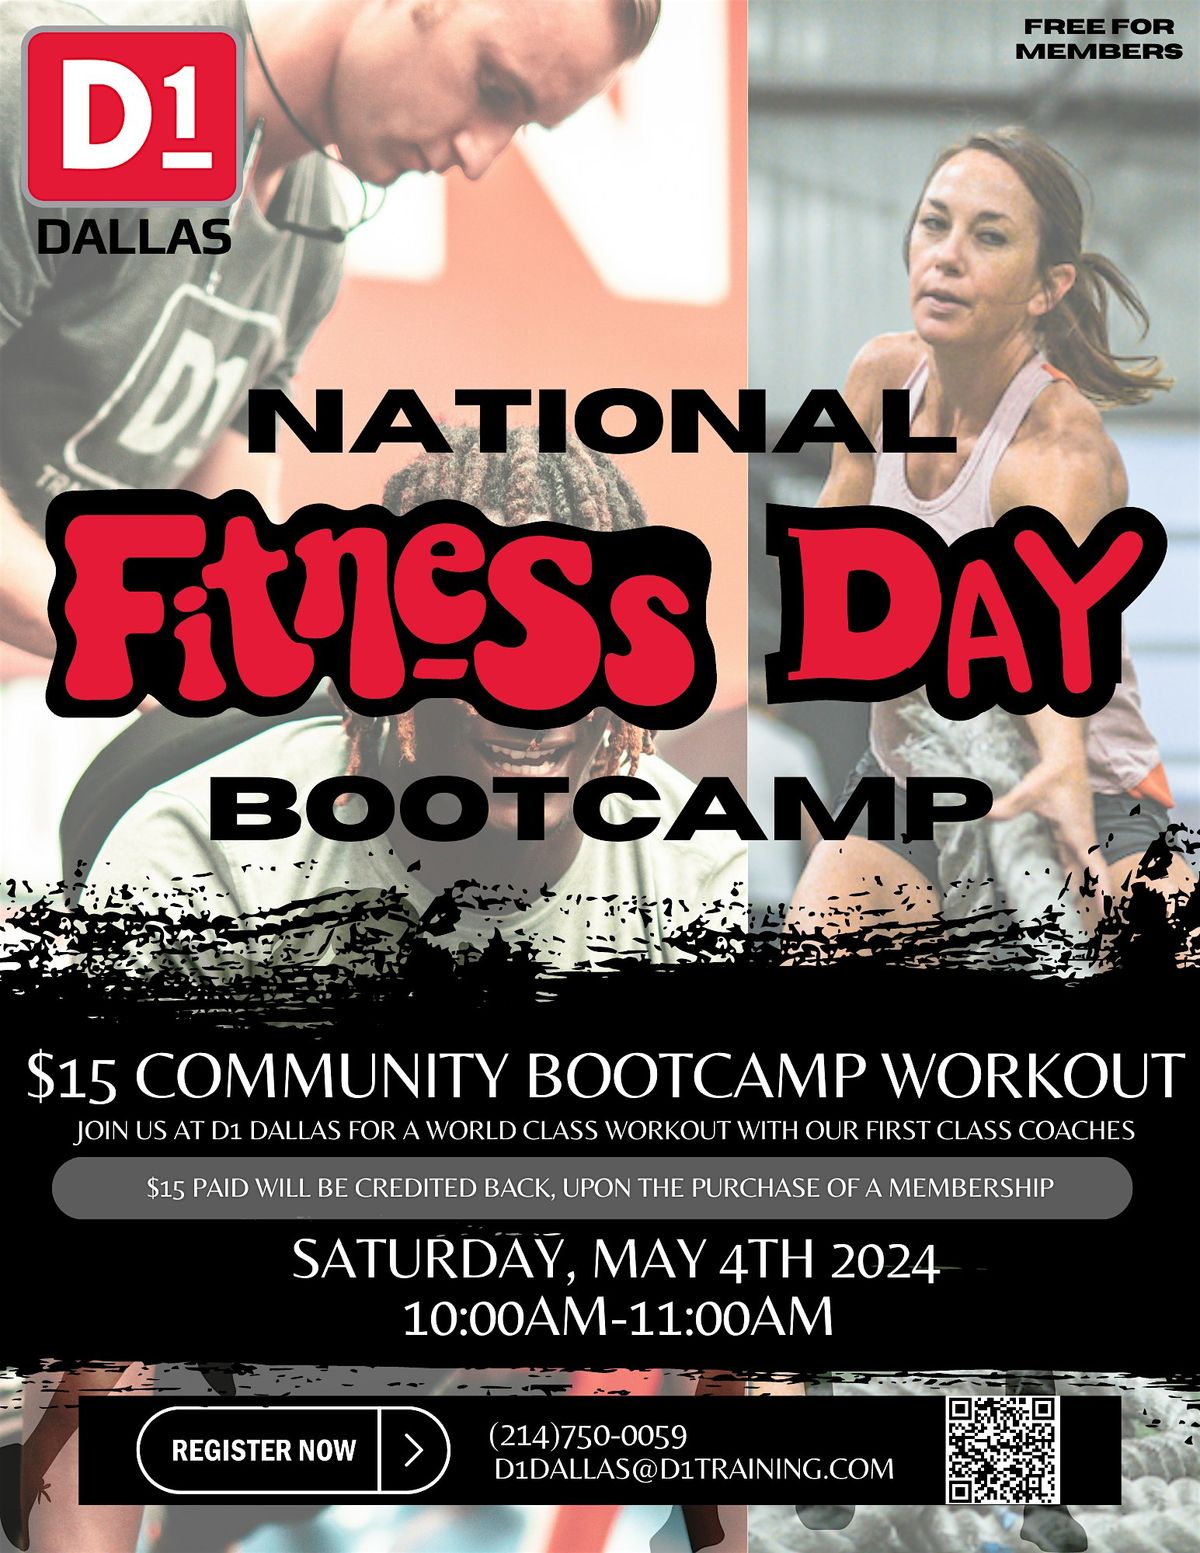 National Fitness Day Bootcamp